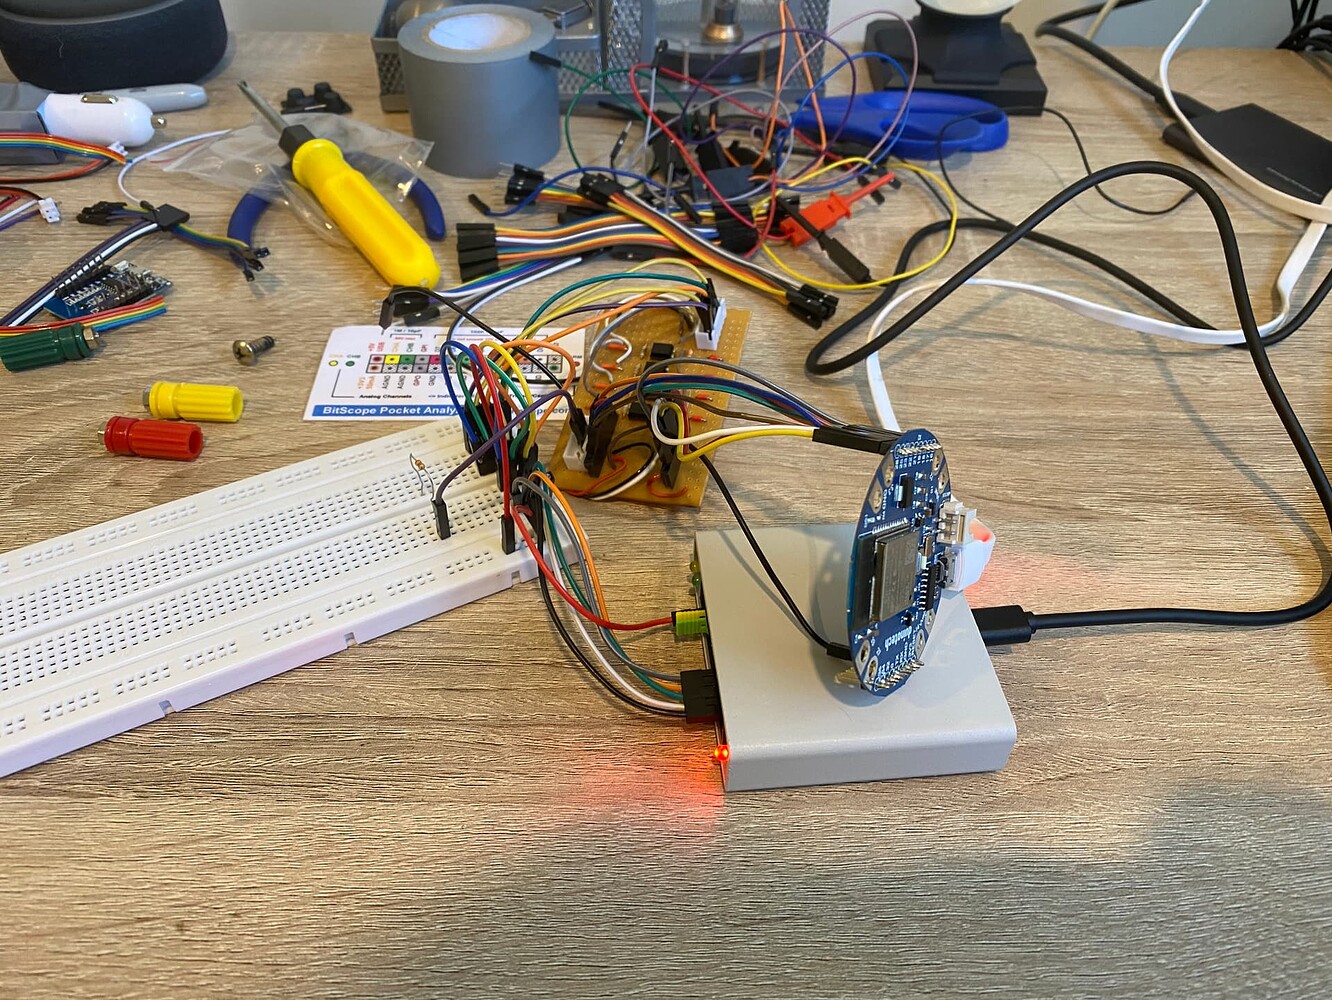 Photo of breadboard and Bitscope on my desk